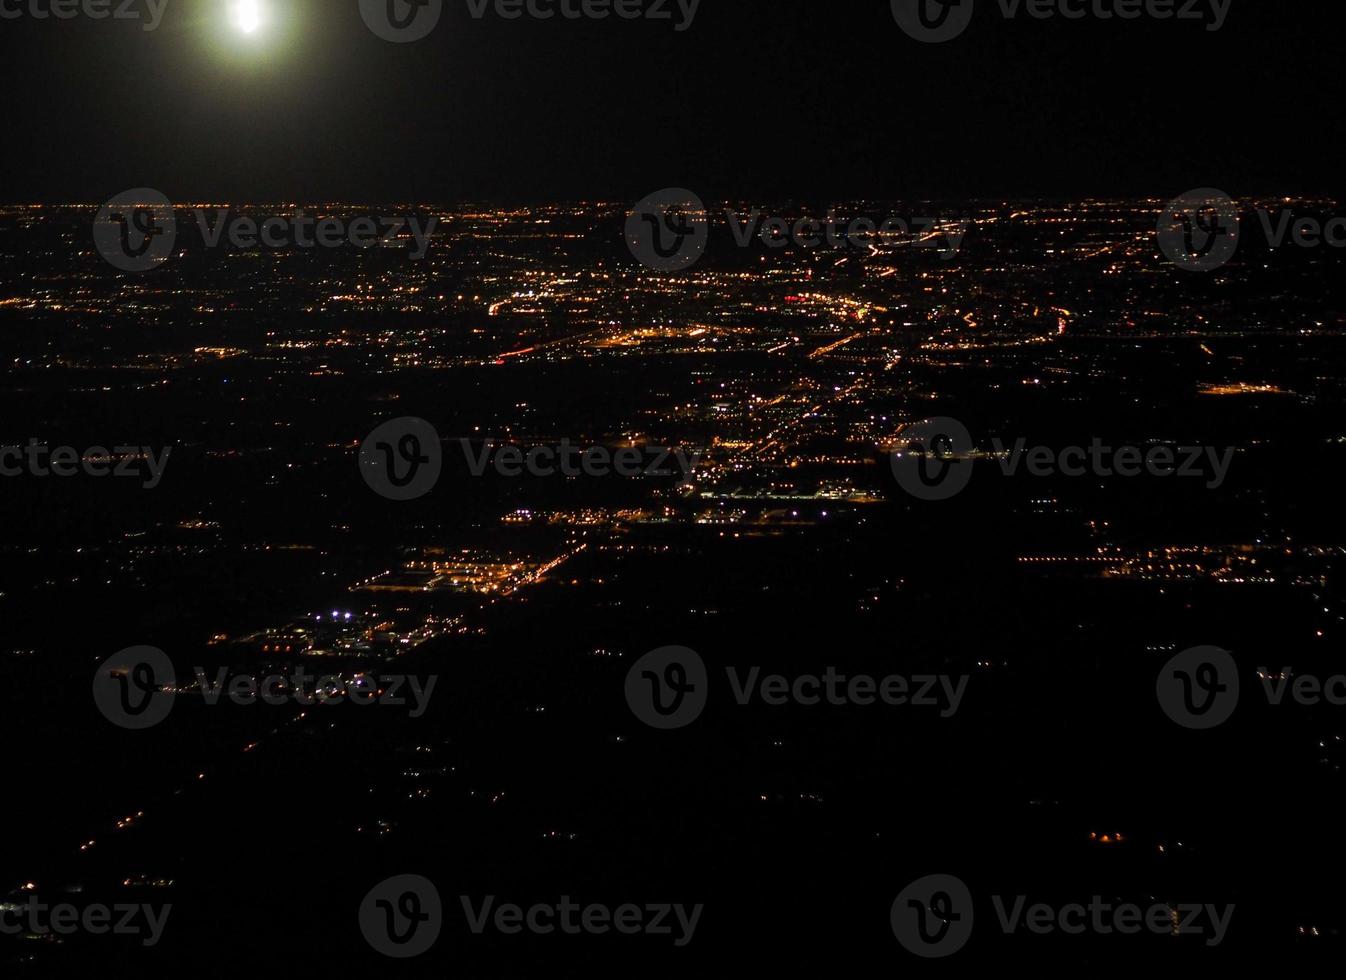 aerial view of town at night photo